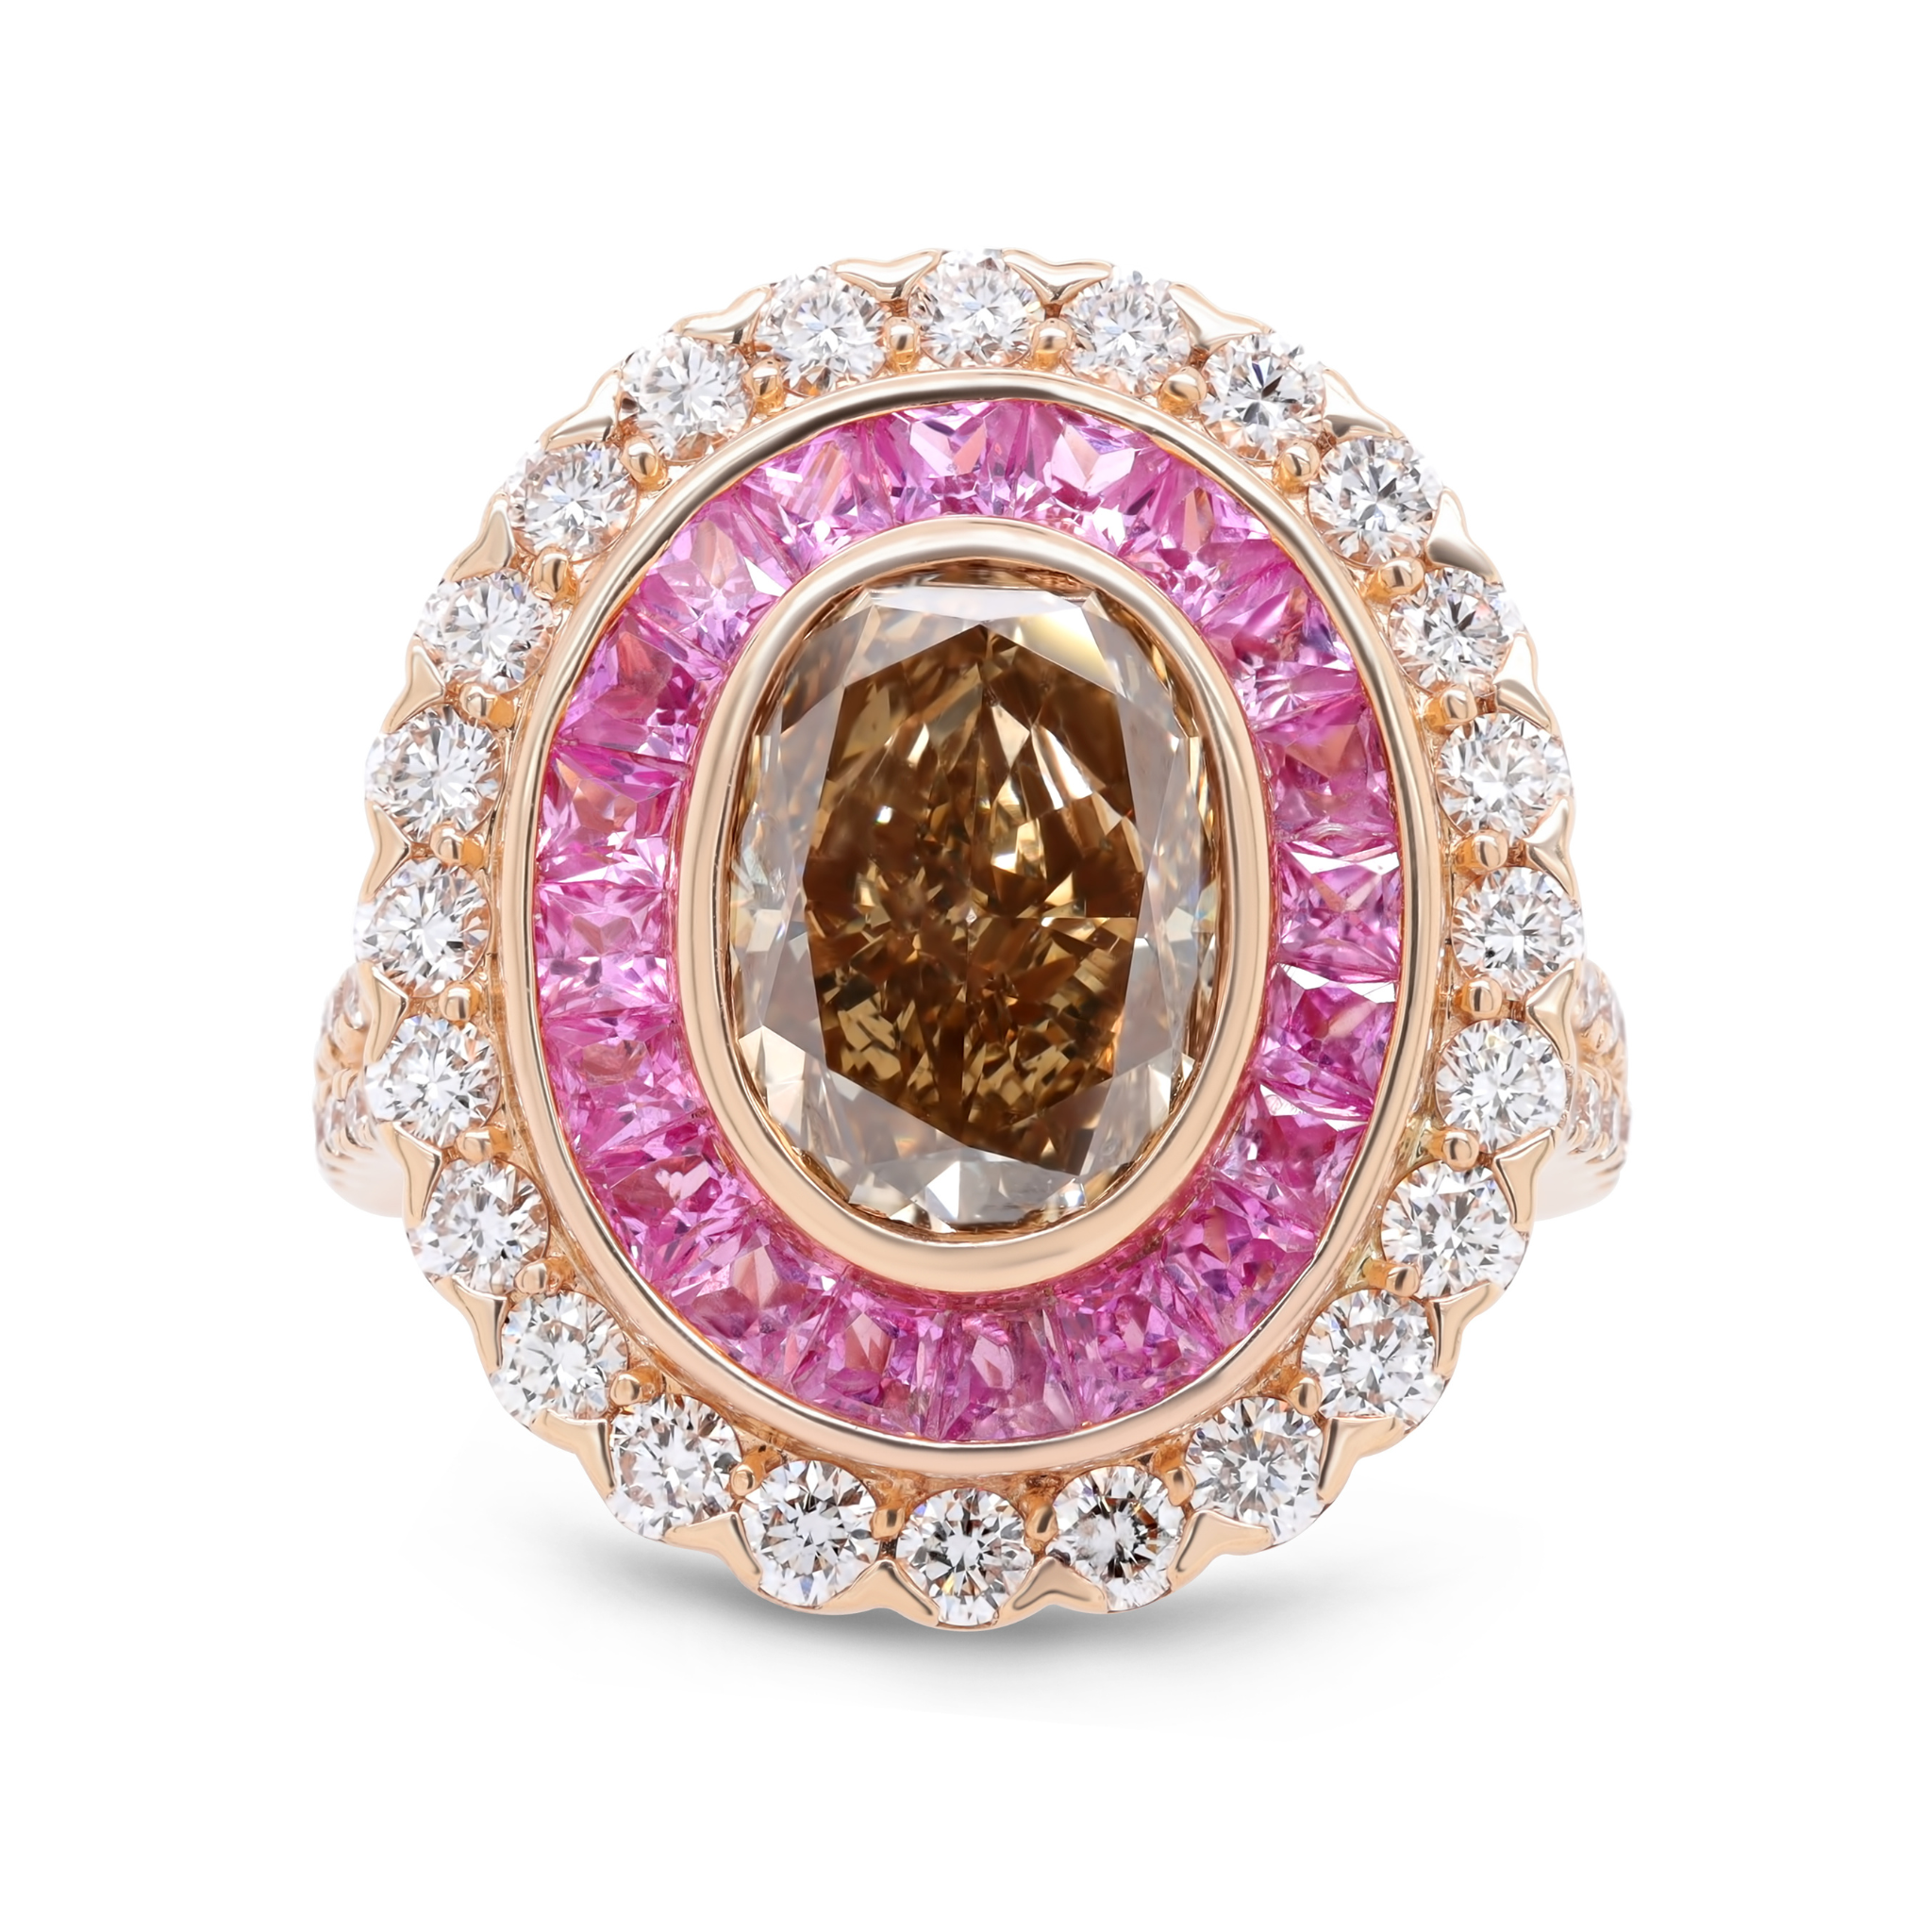 3.31ct Oval Brown and Pink Diamond Ring.jpg